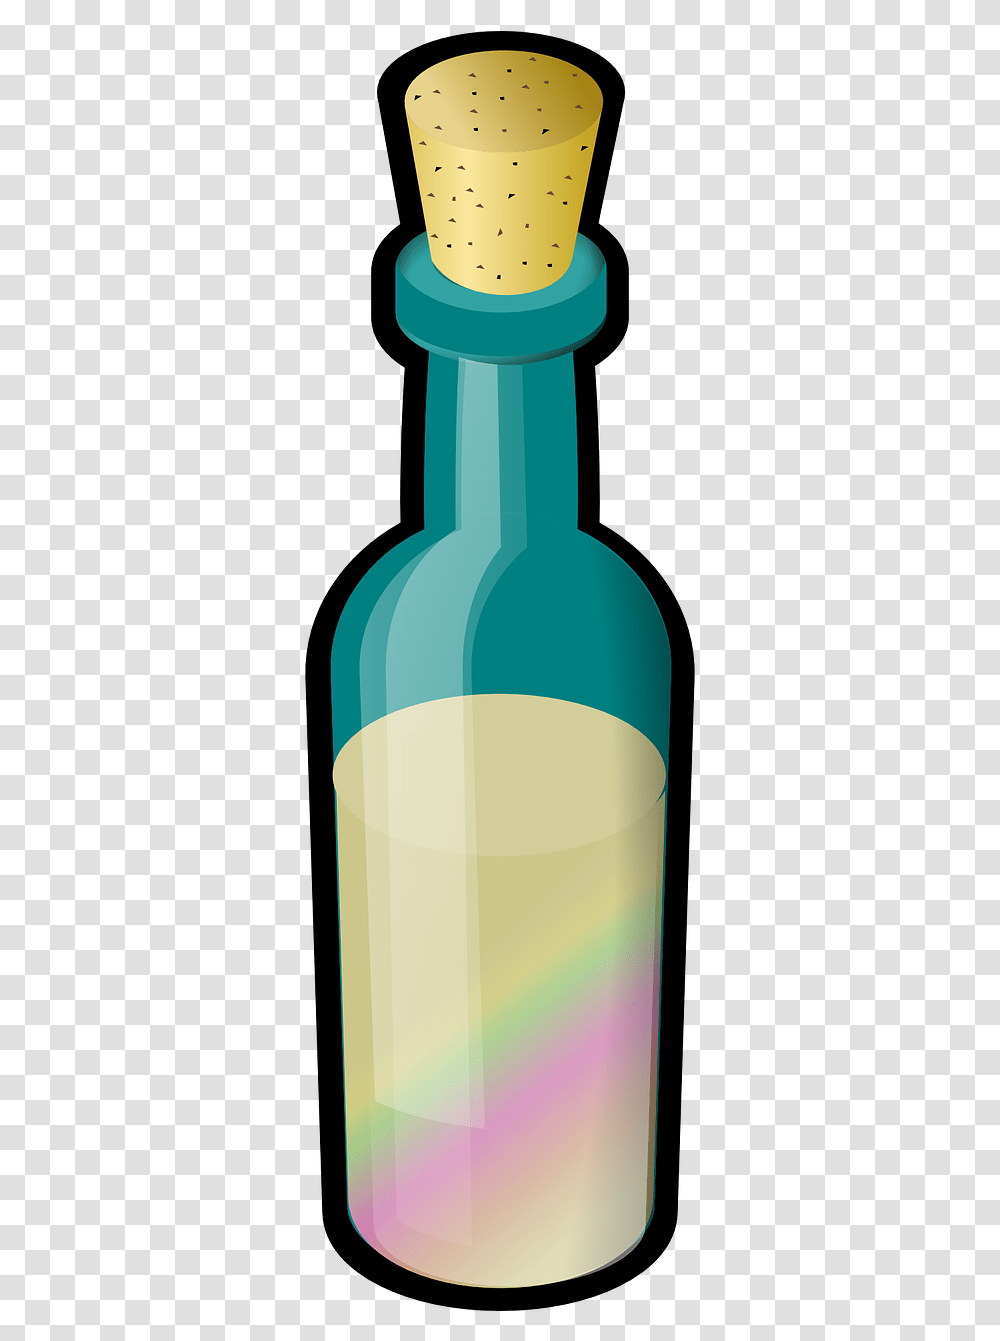 Bottle With Cork Clipart, Beverage, Lotion, Alcohol, Cosmetics Transparent Png